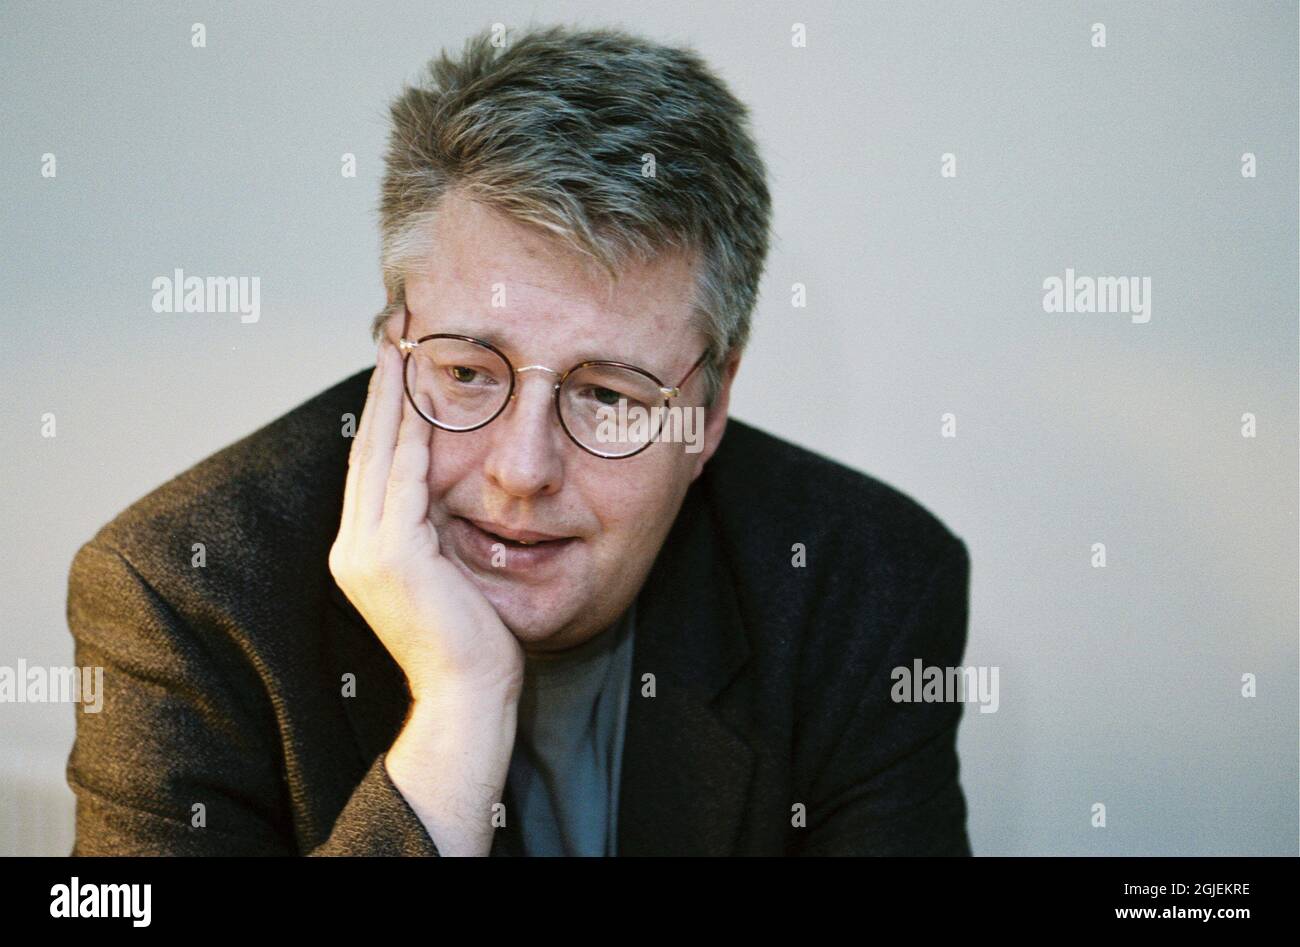 A portrait of Stieg Larsson in Stockholm, Sweden. The late crime writer Stieg Larsson wrote the blockbuster trilogy 'Millennium' which was translated into many languages. Larsson died before his first book was published. Stock Photo